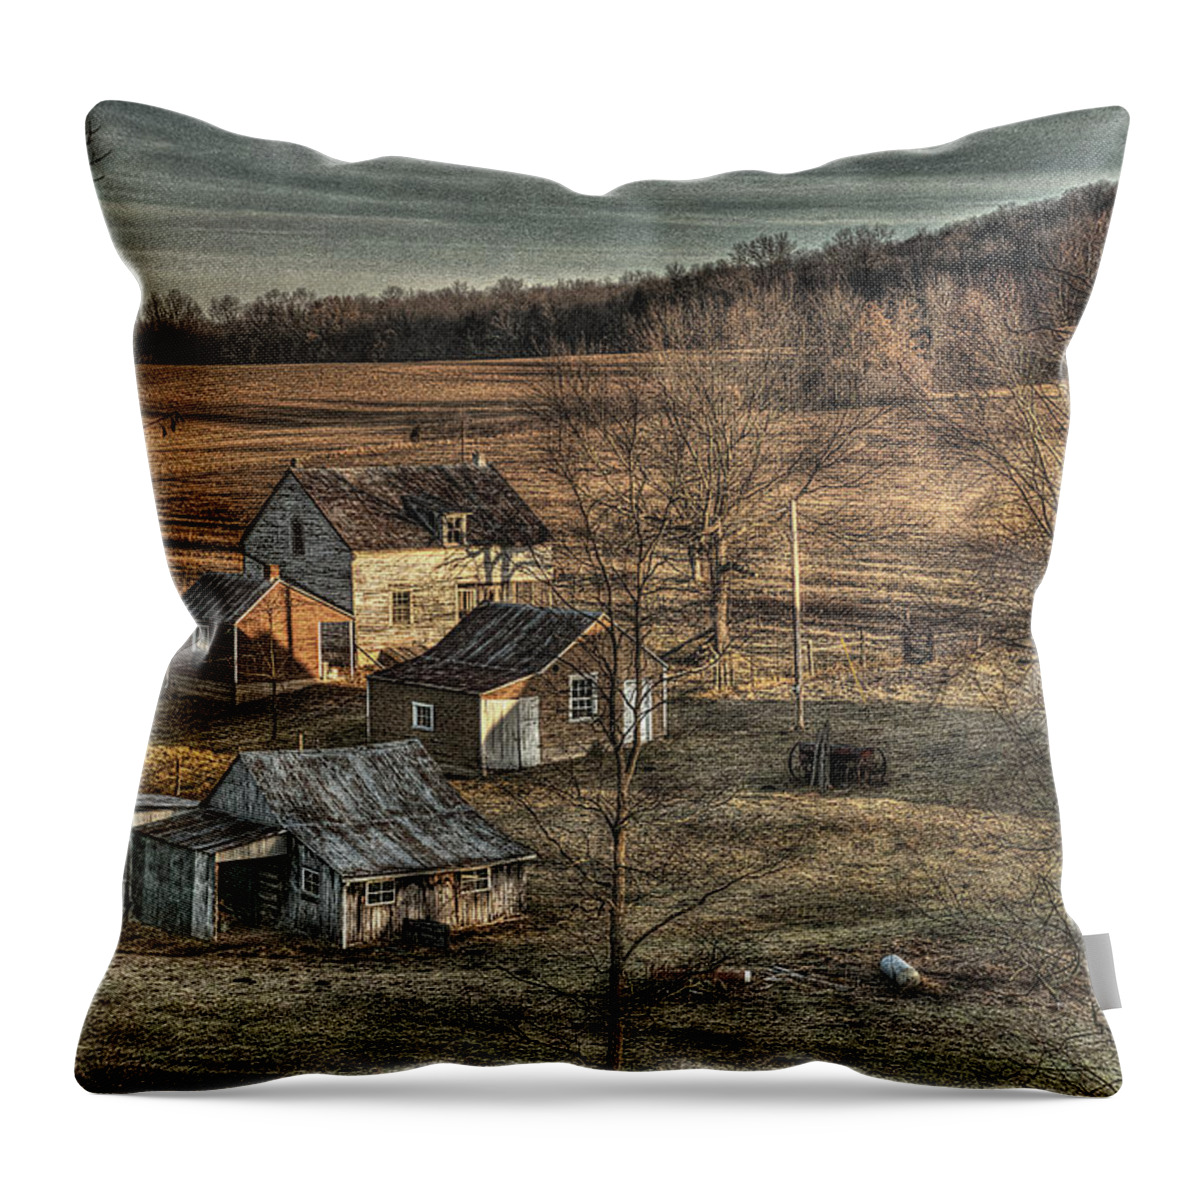 The Farmer In The Dell Throw Pillow featuring the photograph The Farmer in the Dell by William Fields